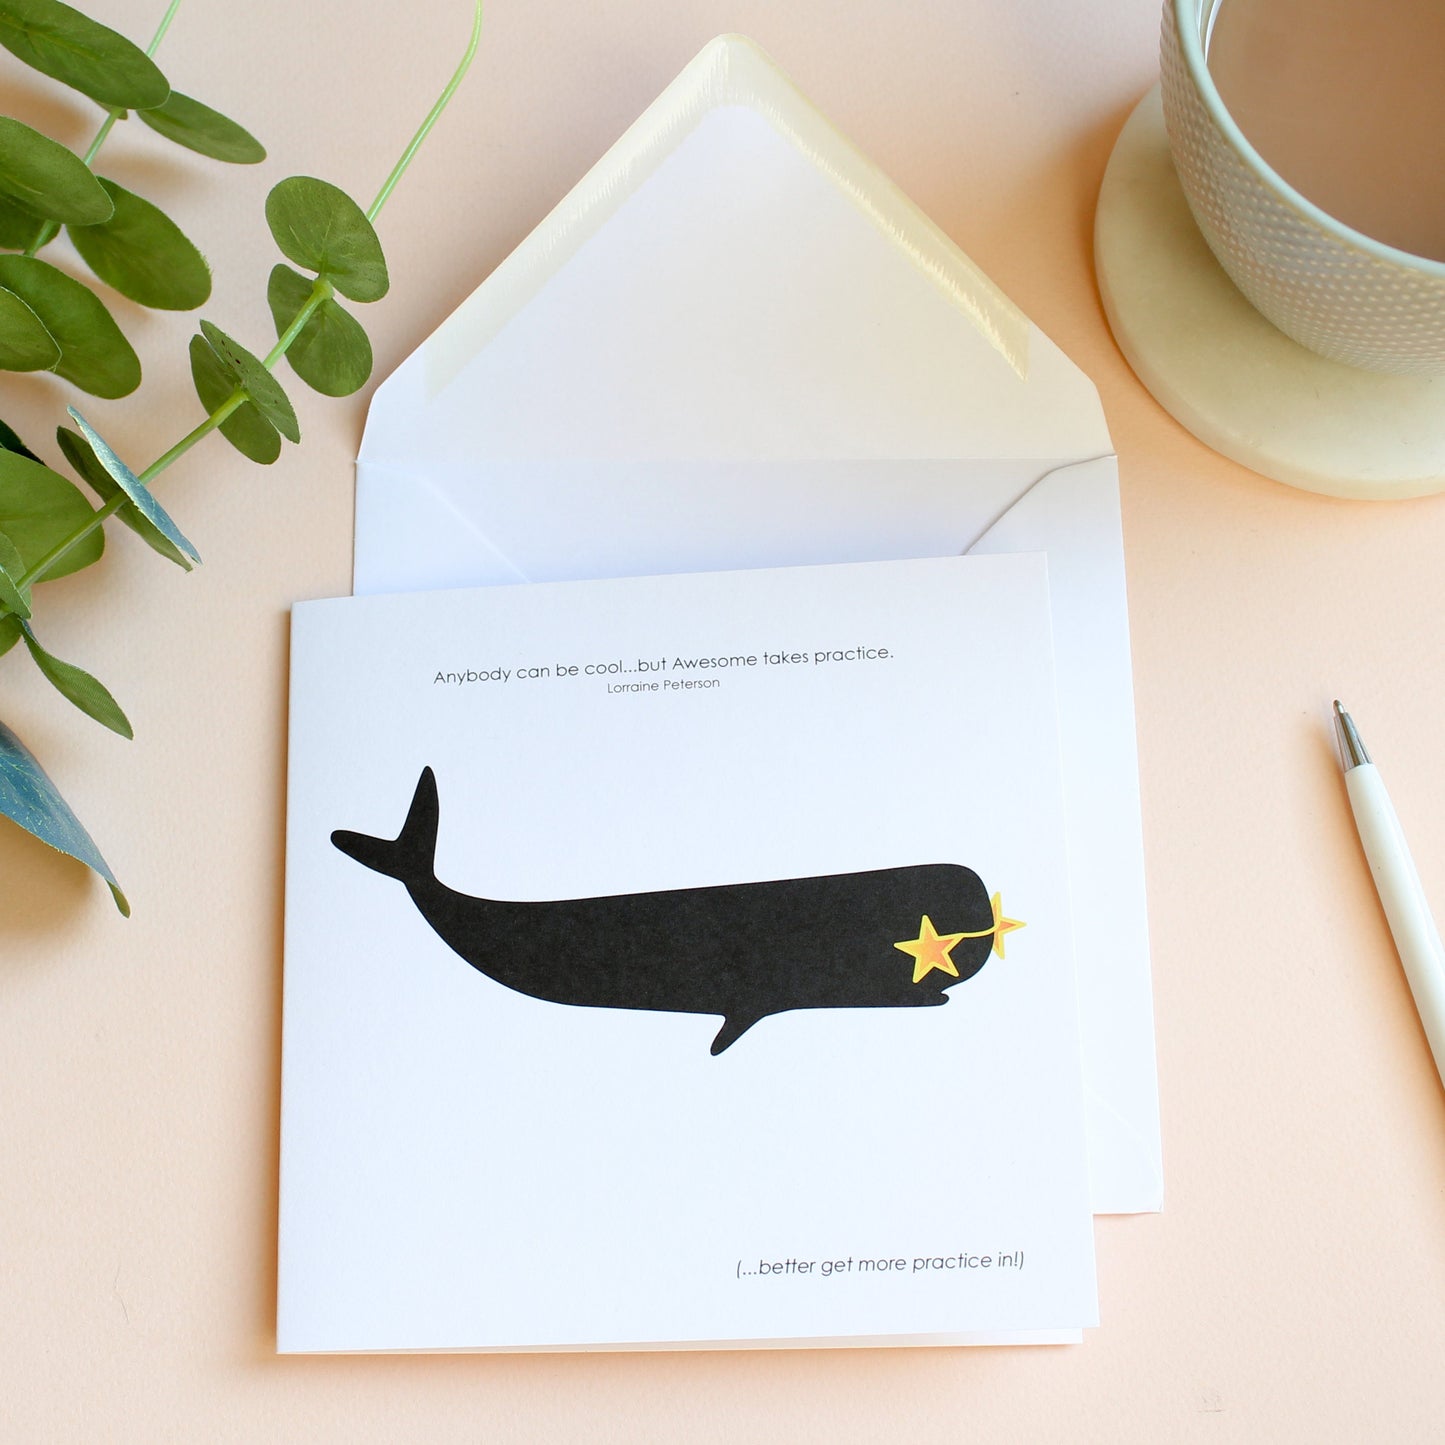 Awesome Takes Practice - Whale Birthday Card